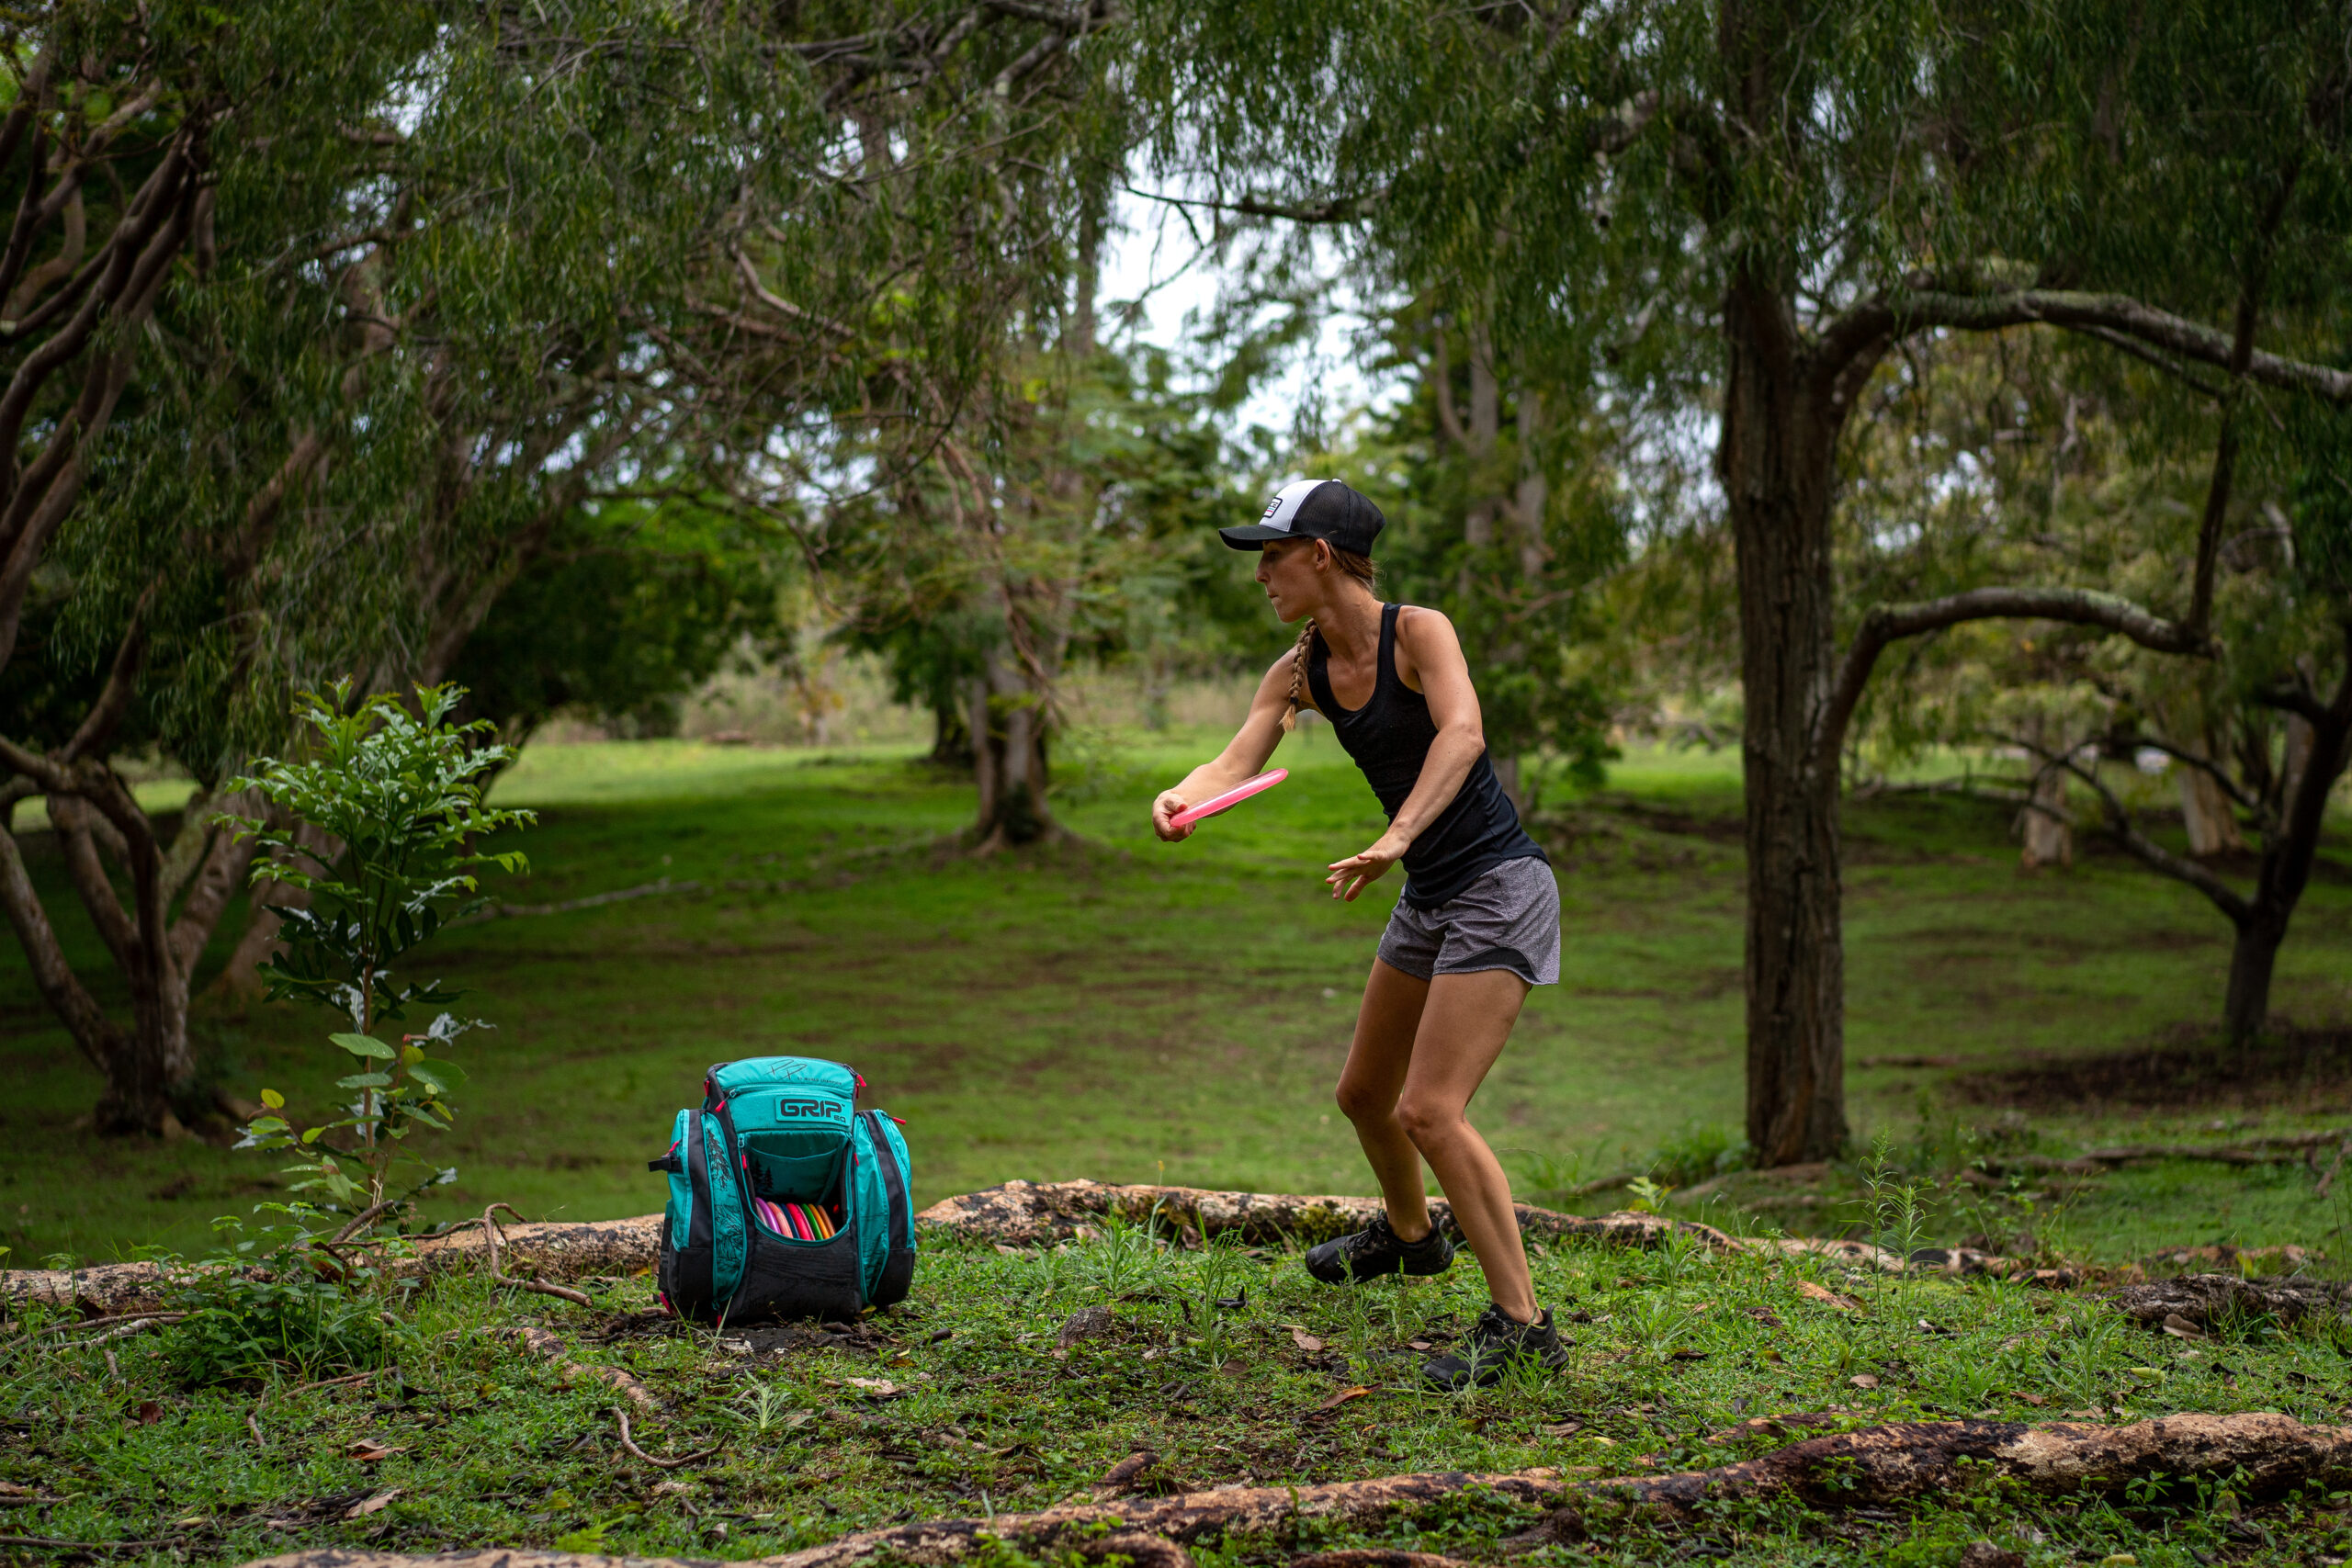 A rear view shot of Team GRIPeq member, Paige Pierce, throwing a disc in Hawaii as her signature series BX3 bag sits next to her on the ground.